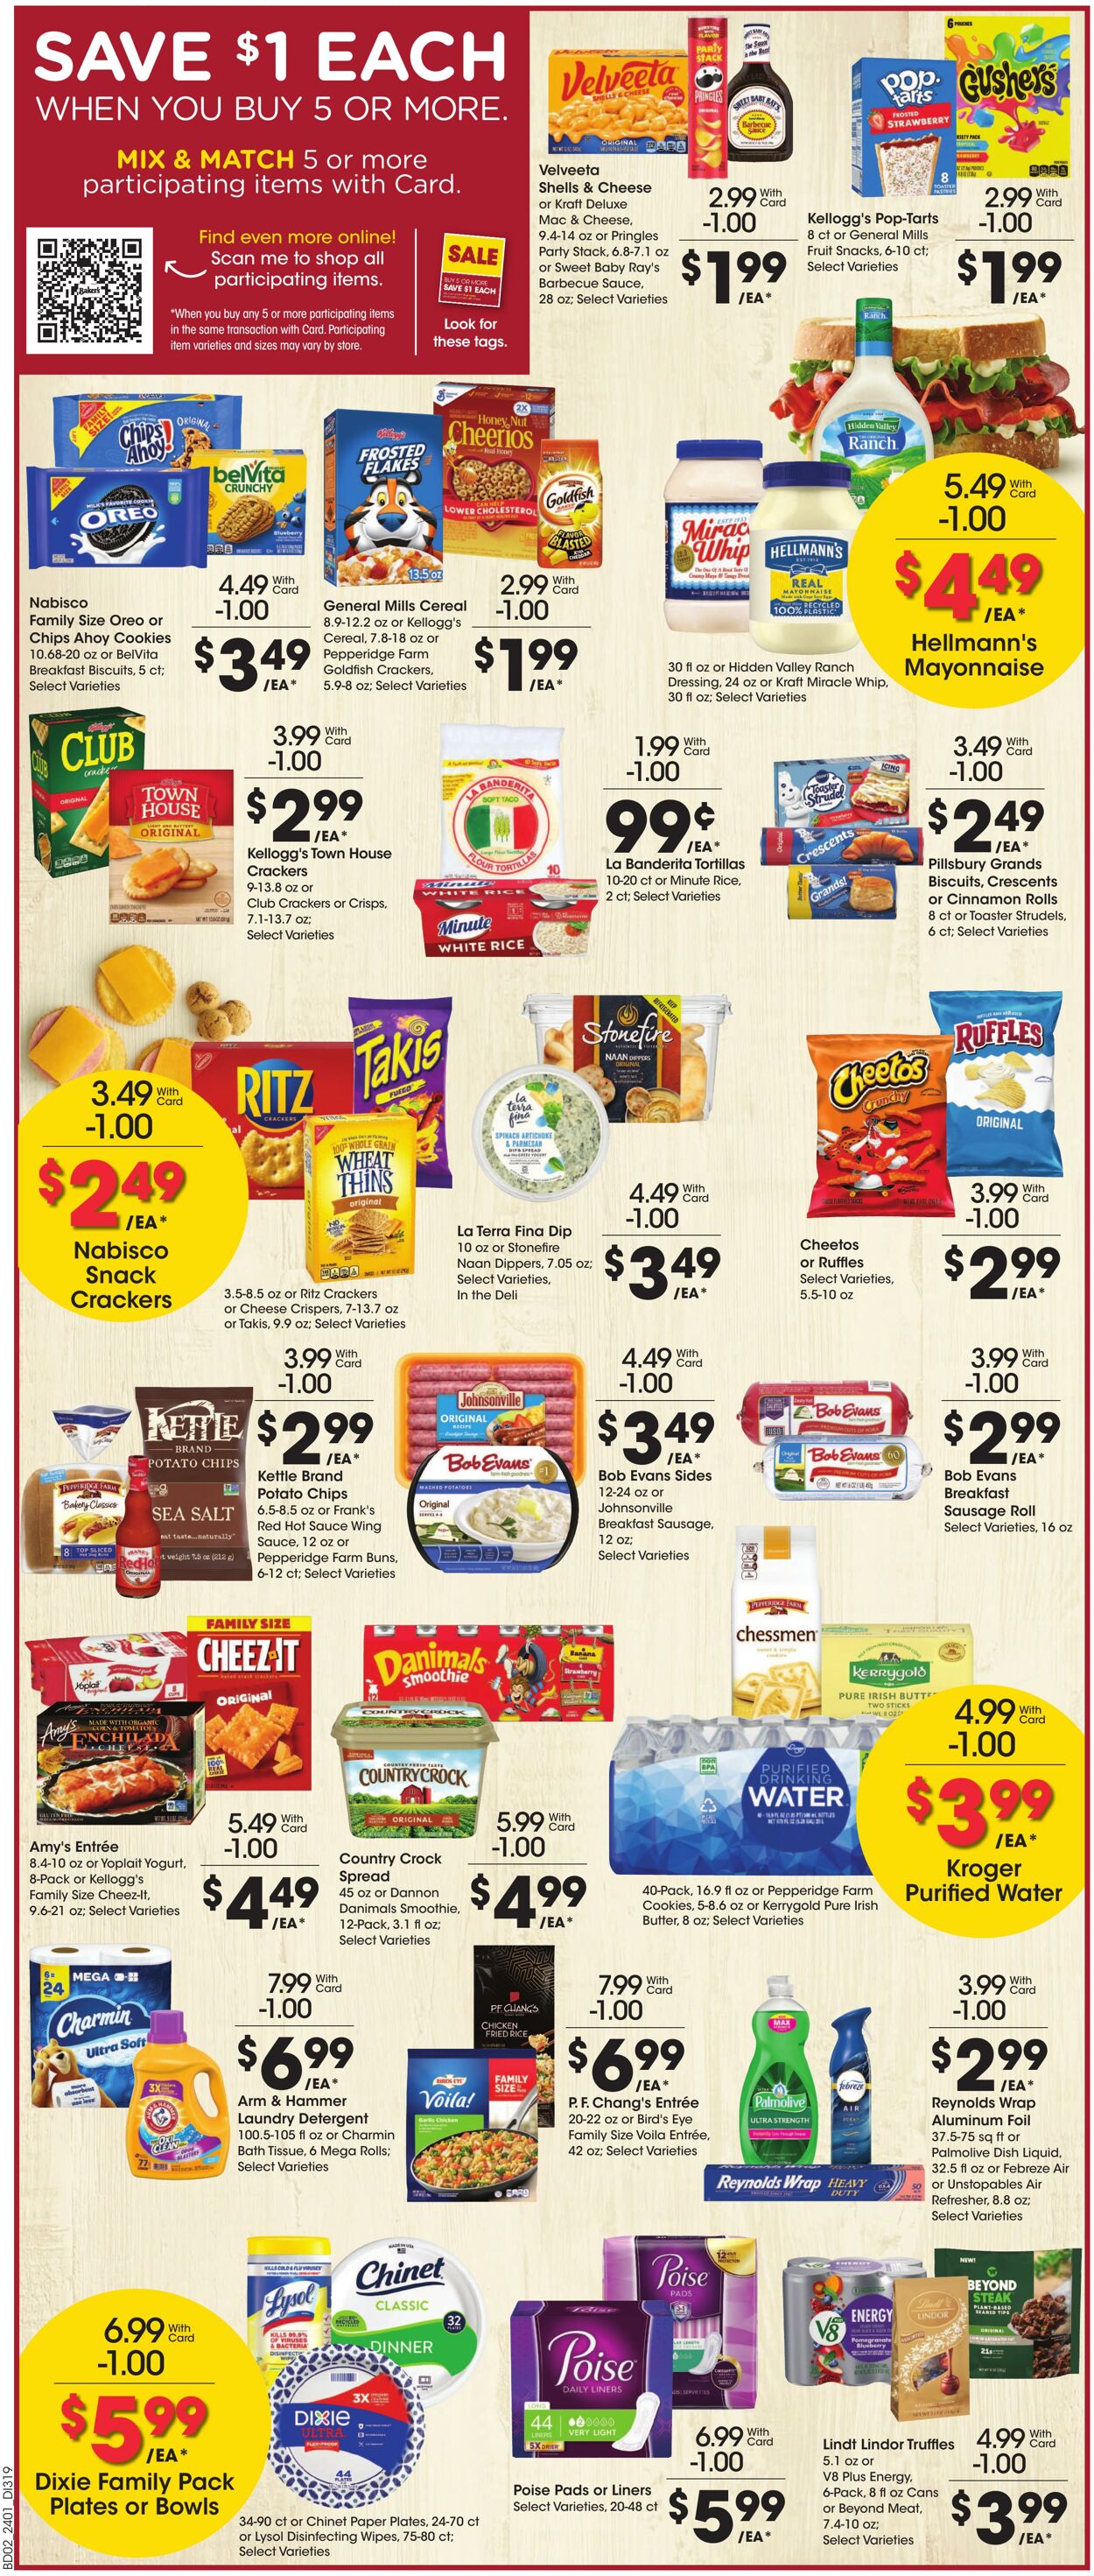 Weekly ad Baker's 02/07/2024 - 02/13/2024